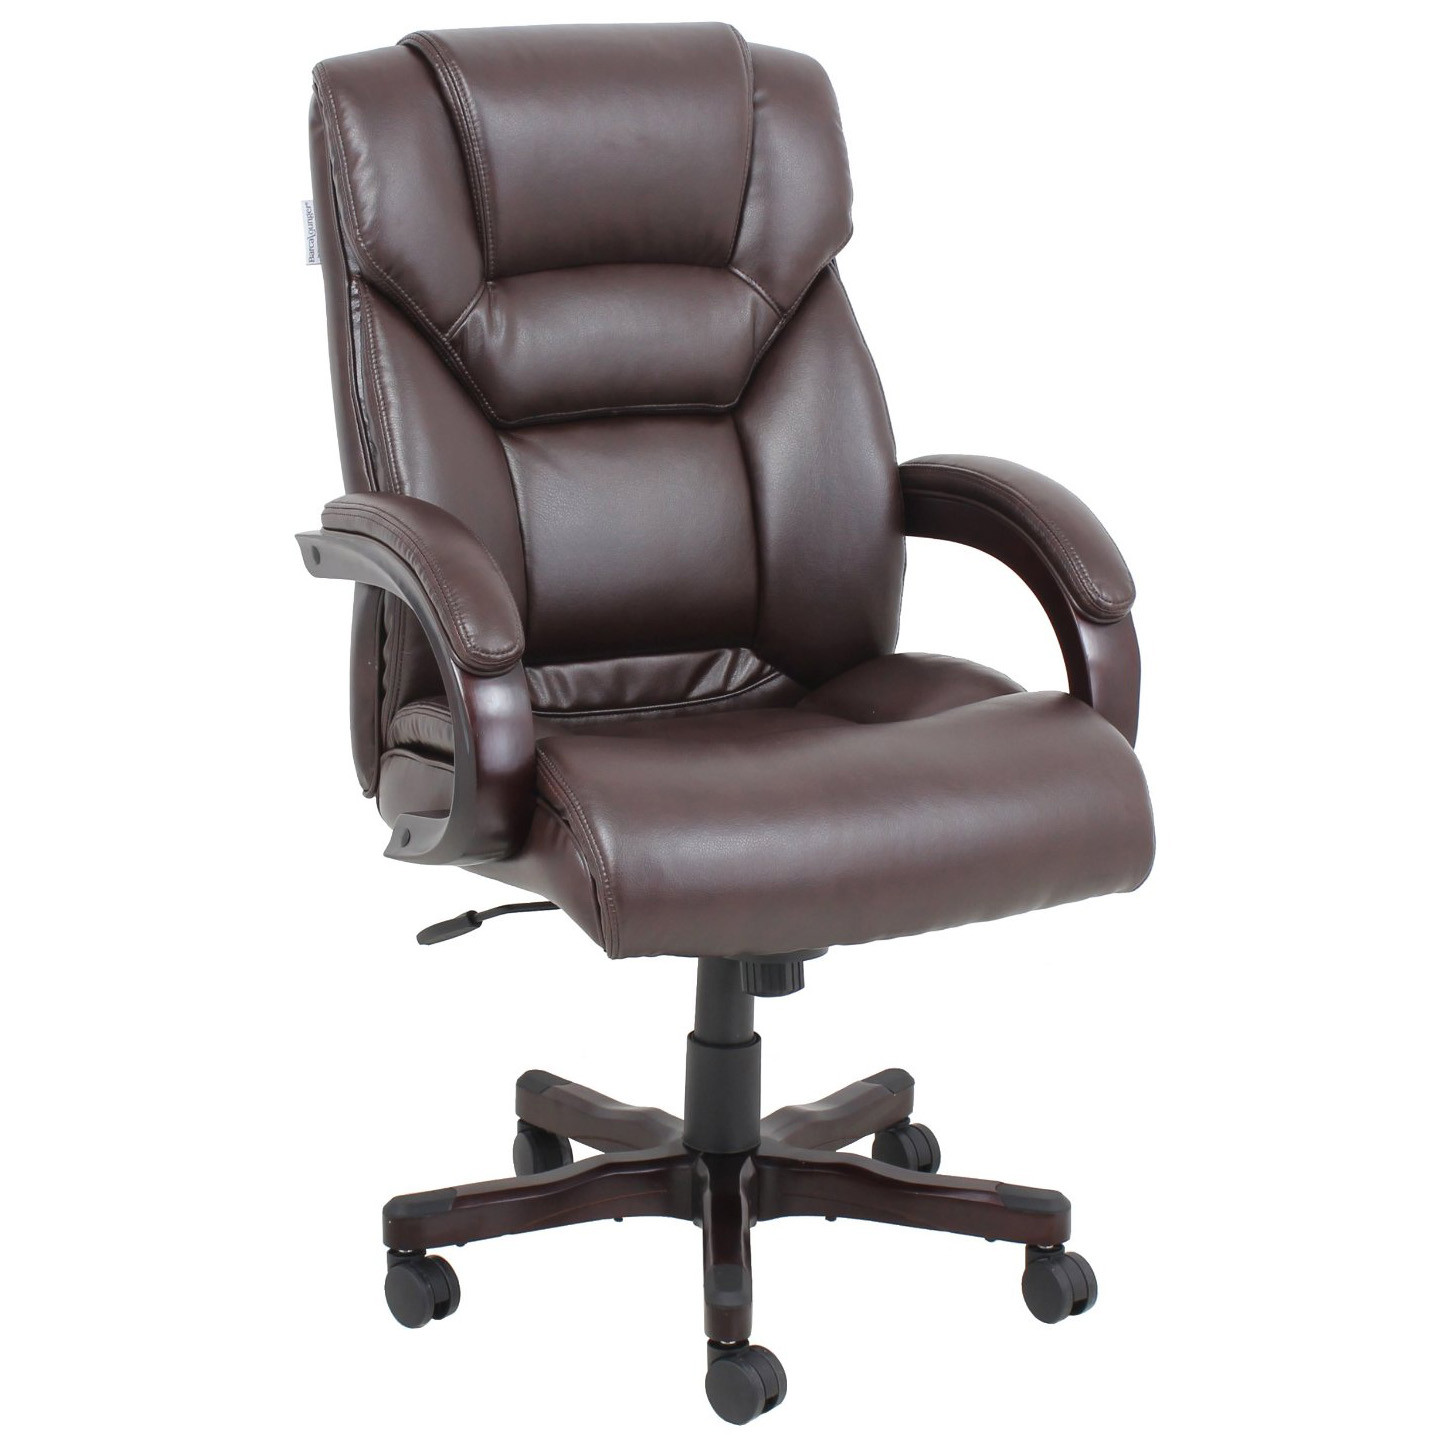 Best ideas about Home Office Chair
. Save or Pin Barcalounger Neptune II Home fice Desk Chair Recliner Now.